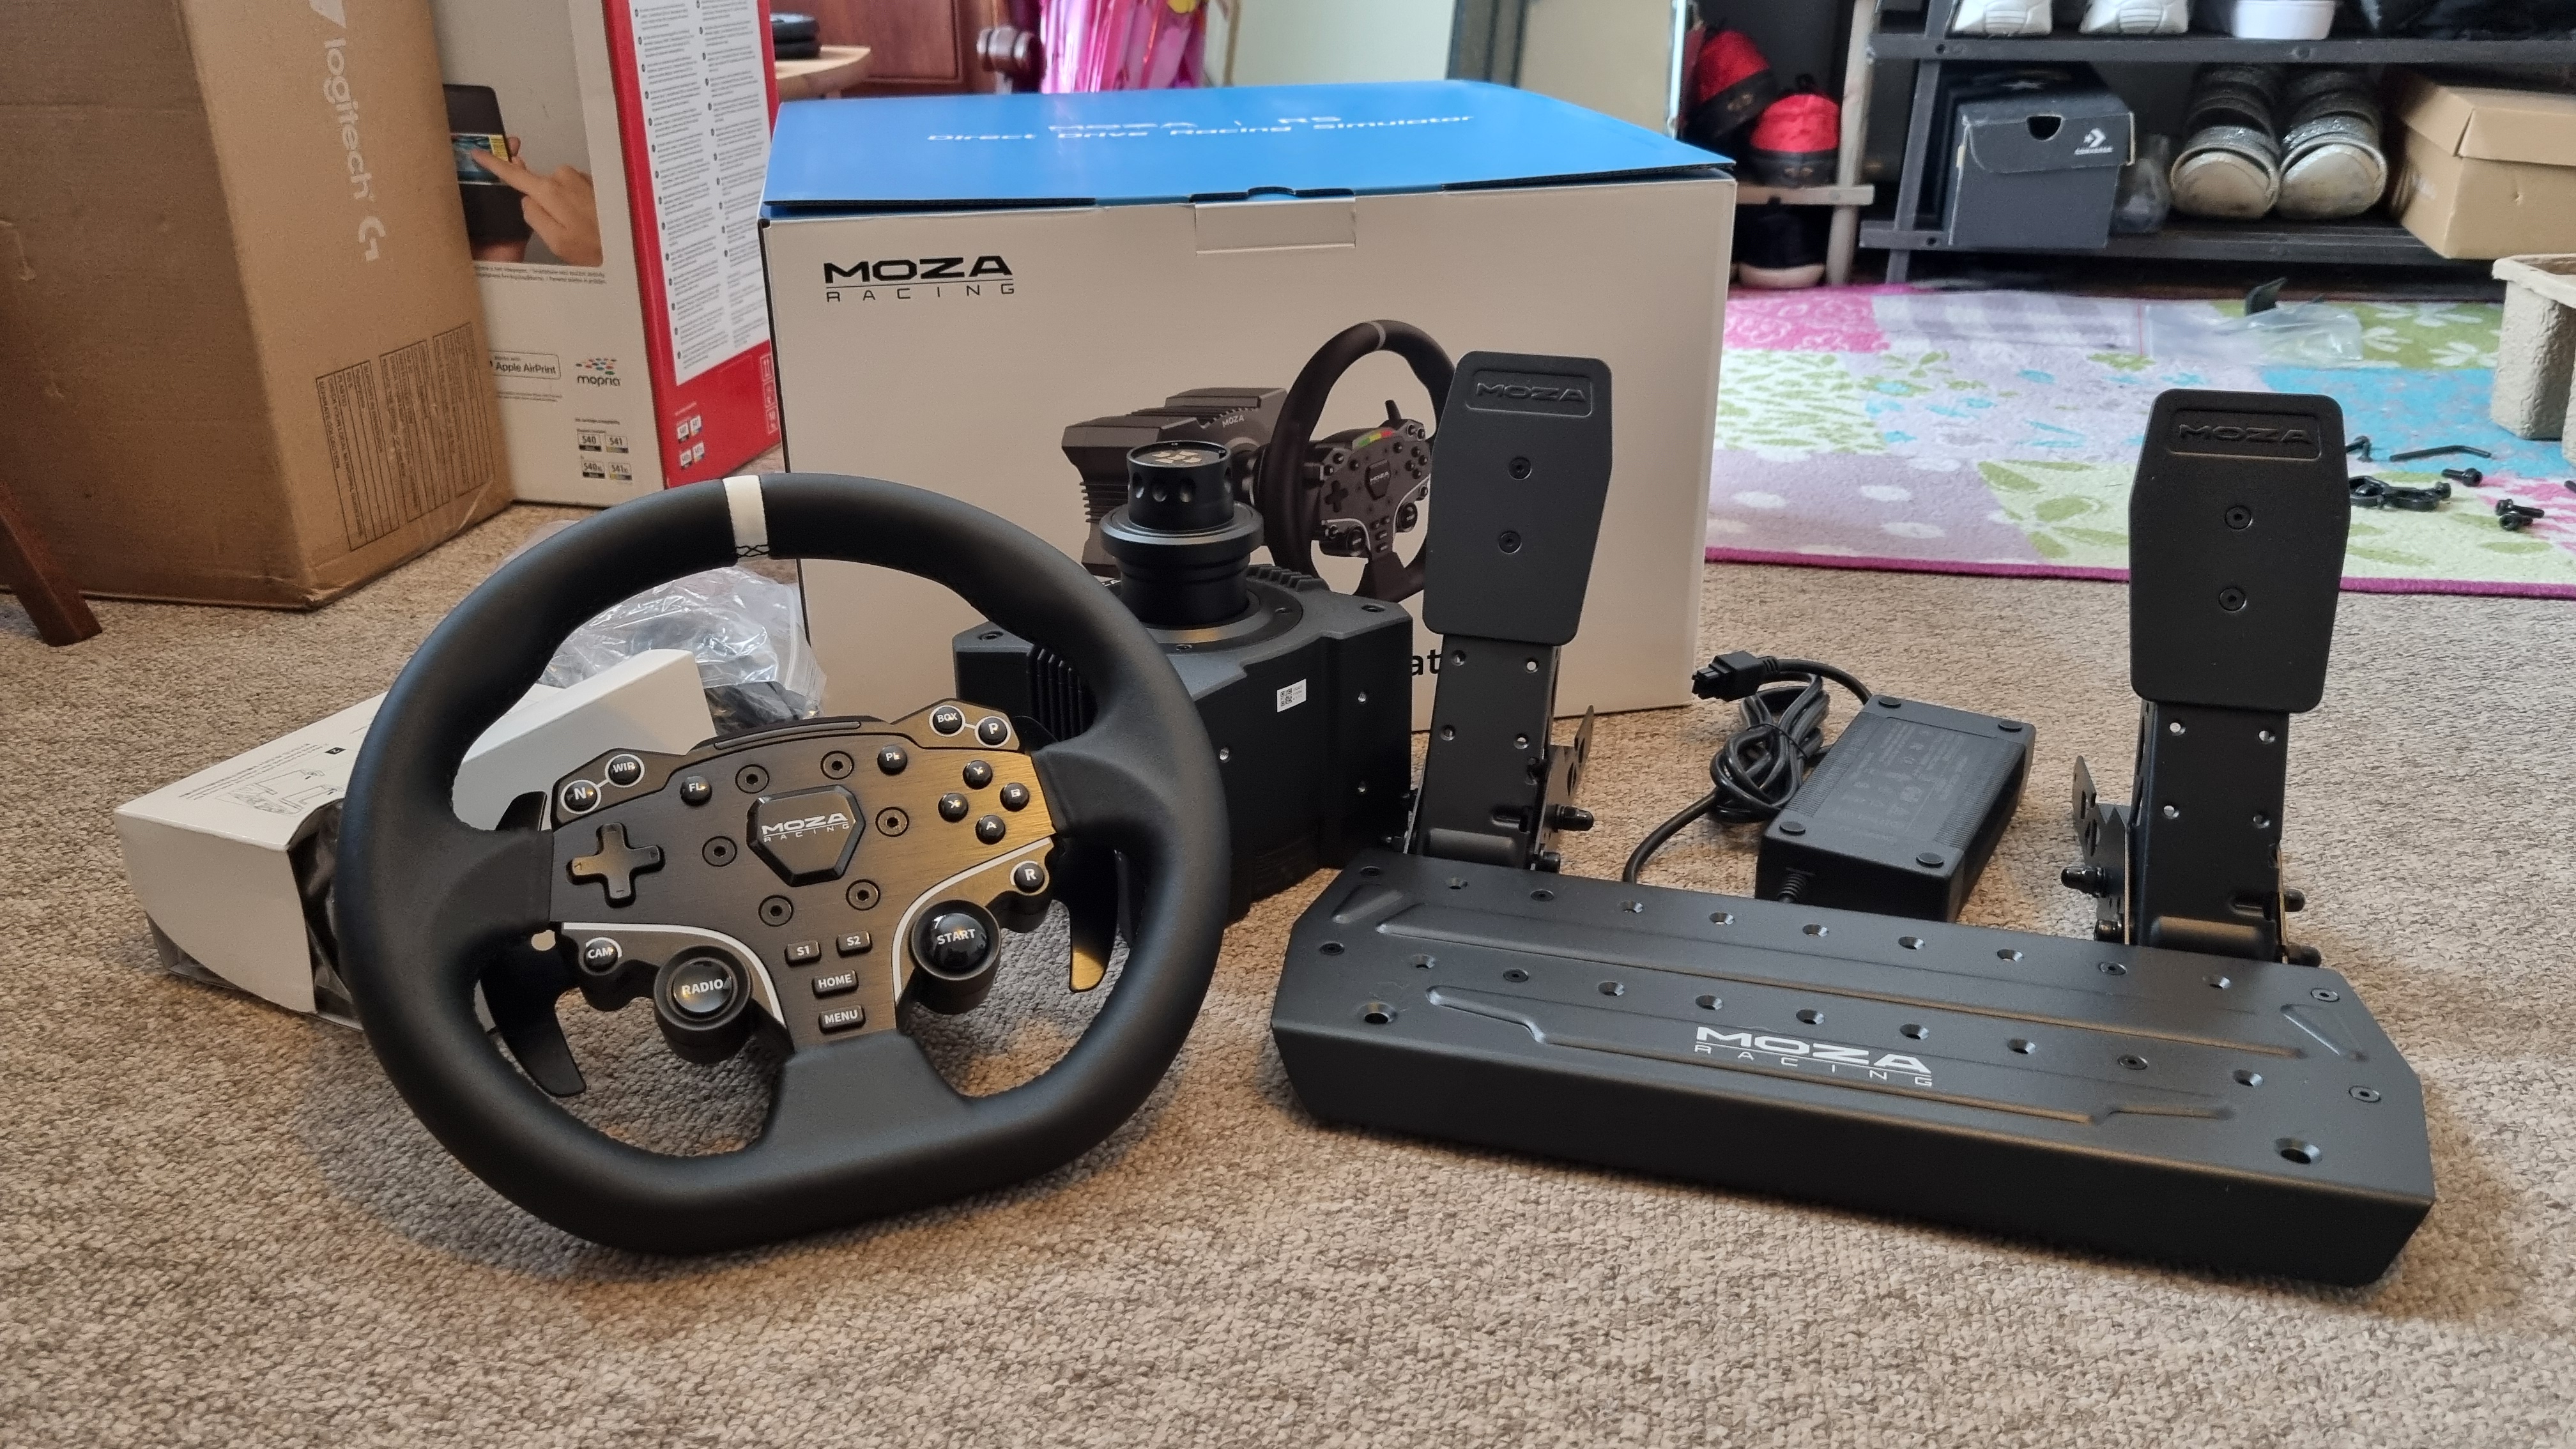 The MOZA R5 Bundle, including wheel, wheelbase, pedals and desk mount